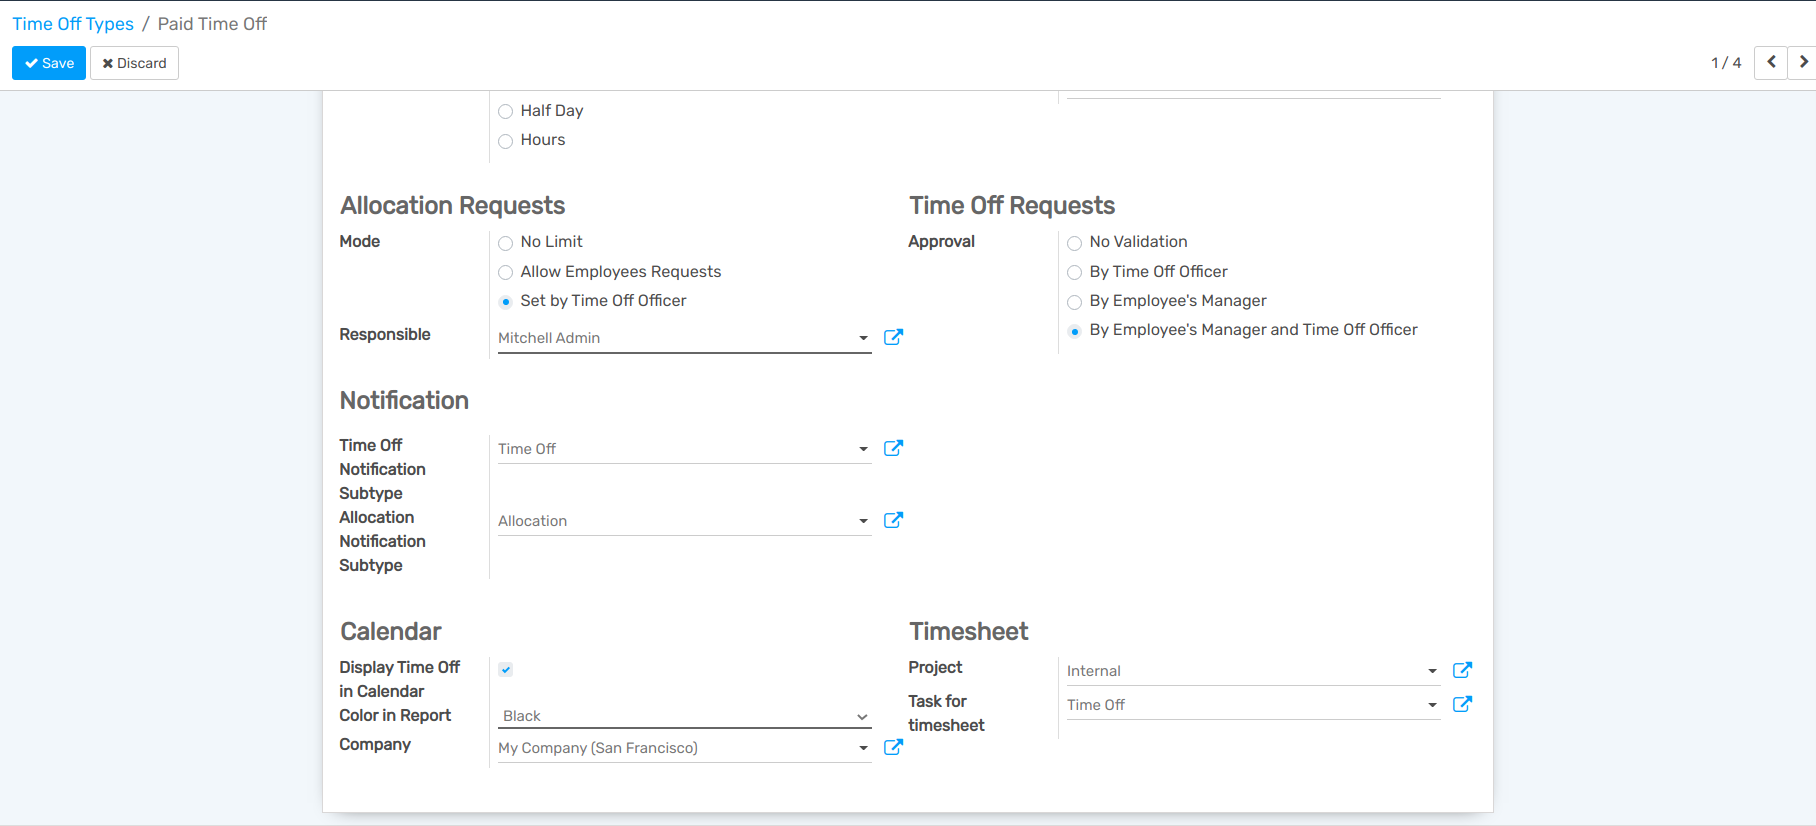 View of a time off types form emphasizing the time off requests and timesheets section in Flectra Time Off